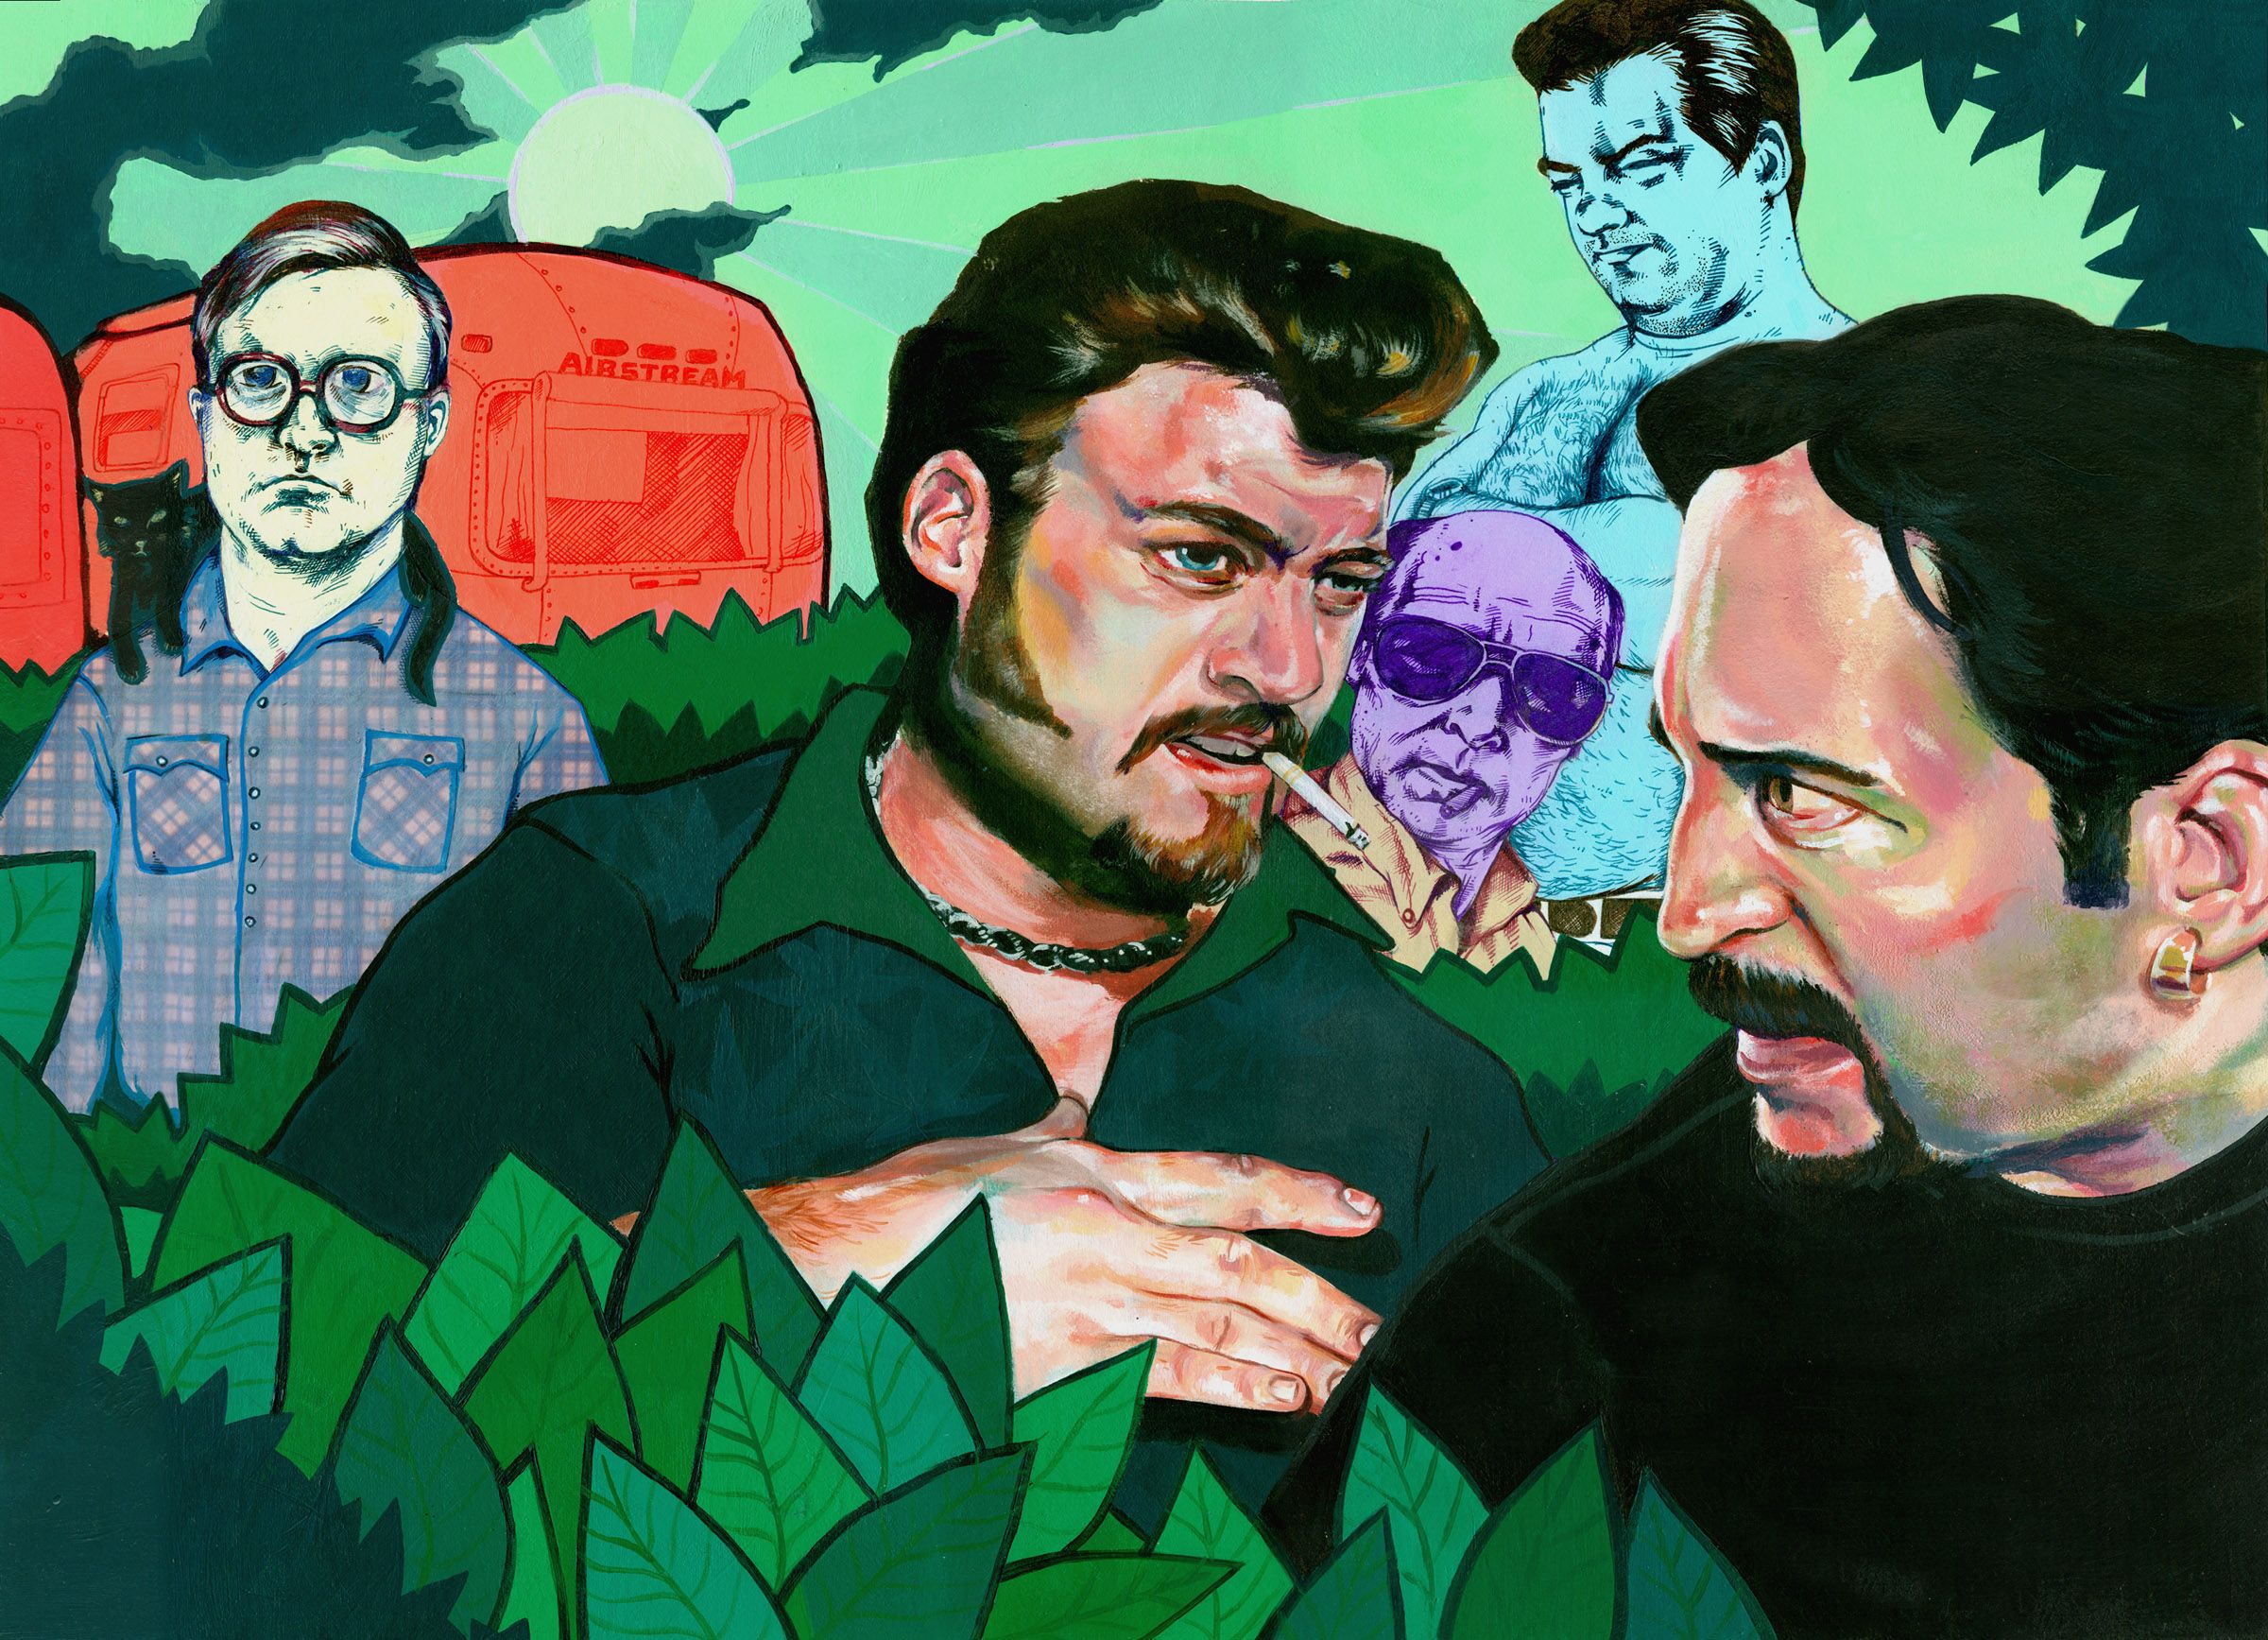 Trailer Park Boys Wallpapers Just Good Vibe